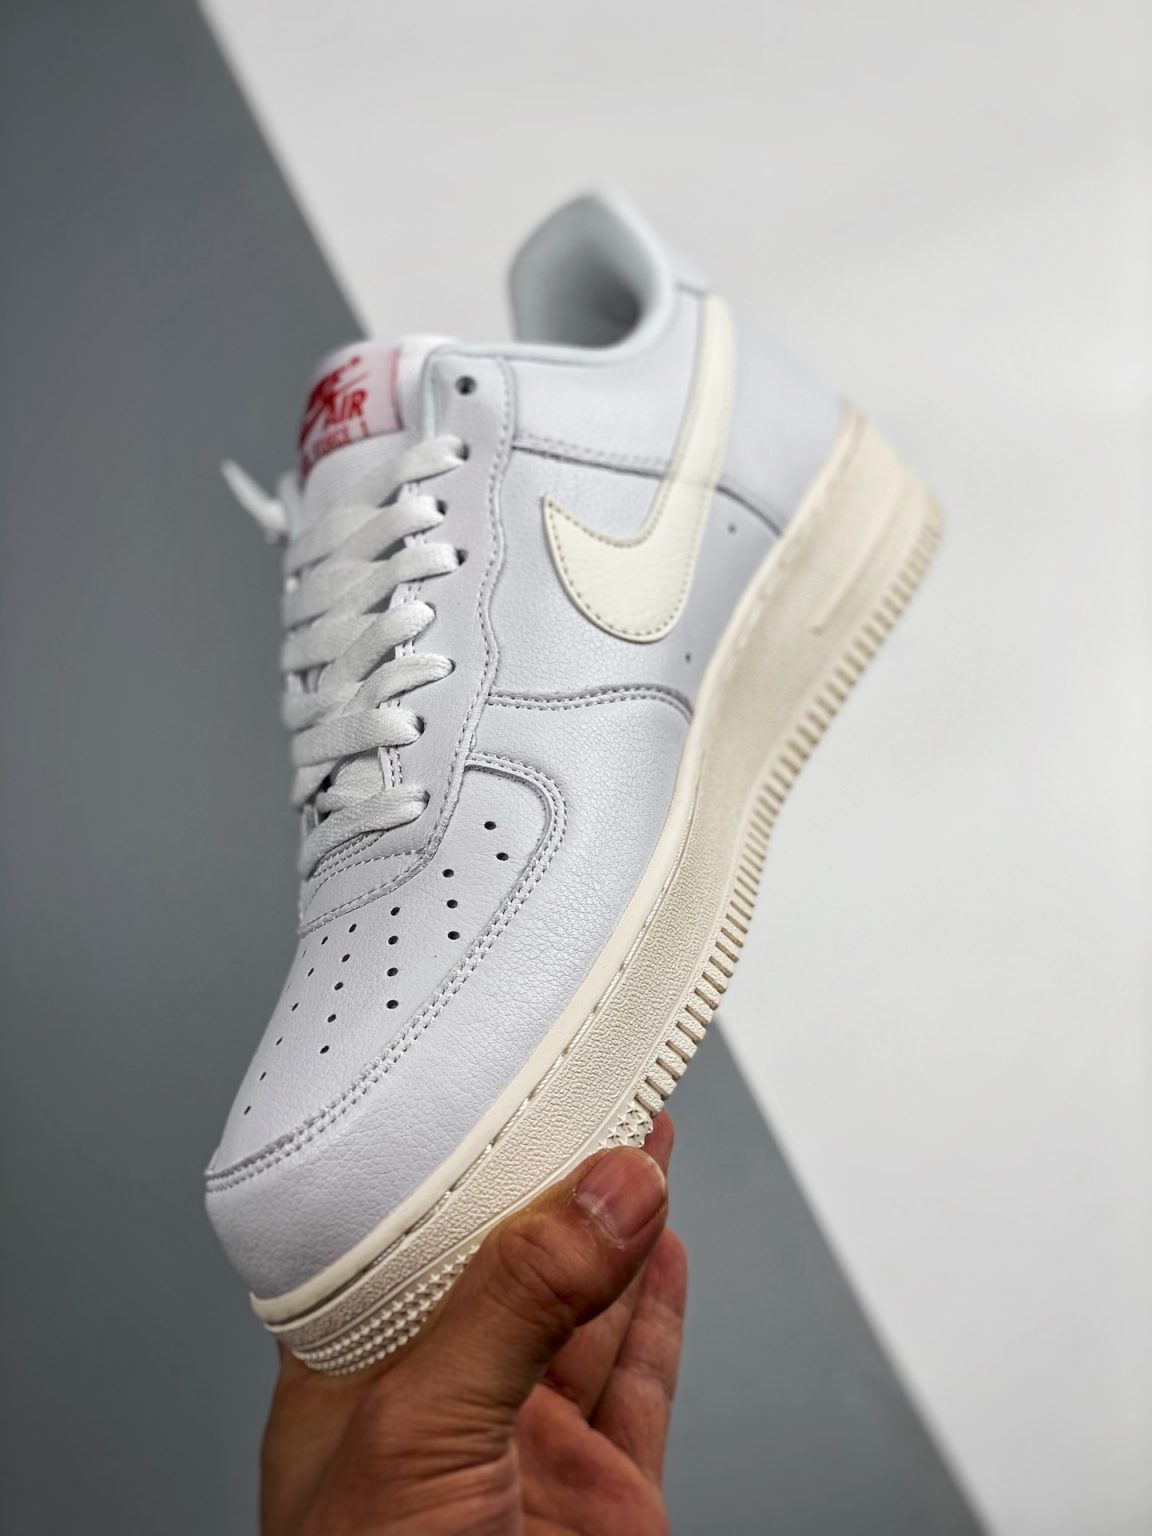 Nike Air Force 1 “Valentine’s Day” White/Sail-University Red For Sale ...